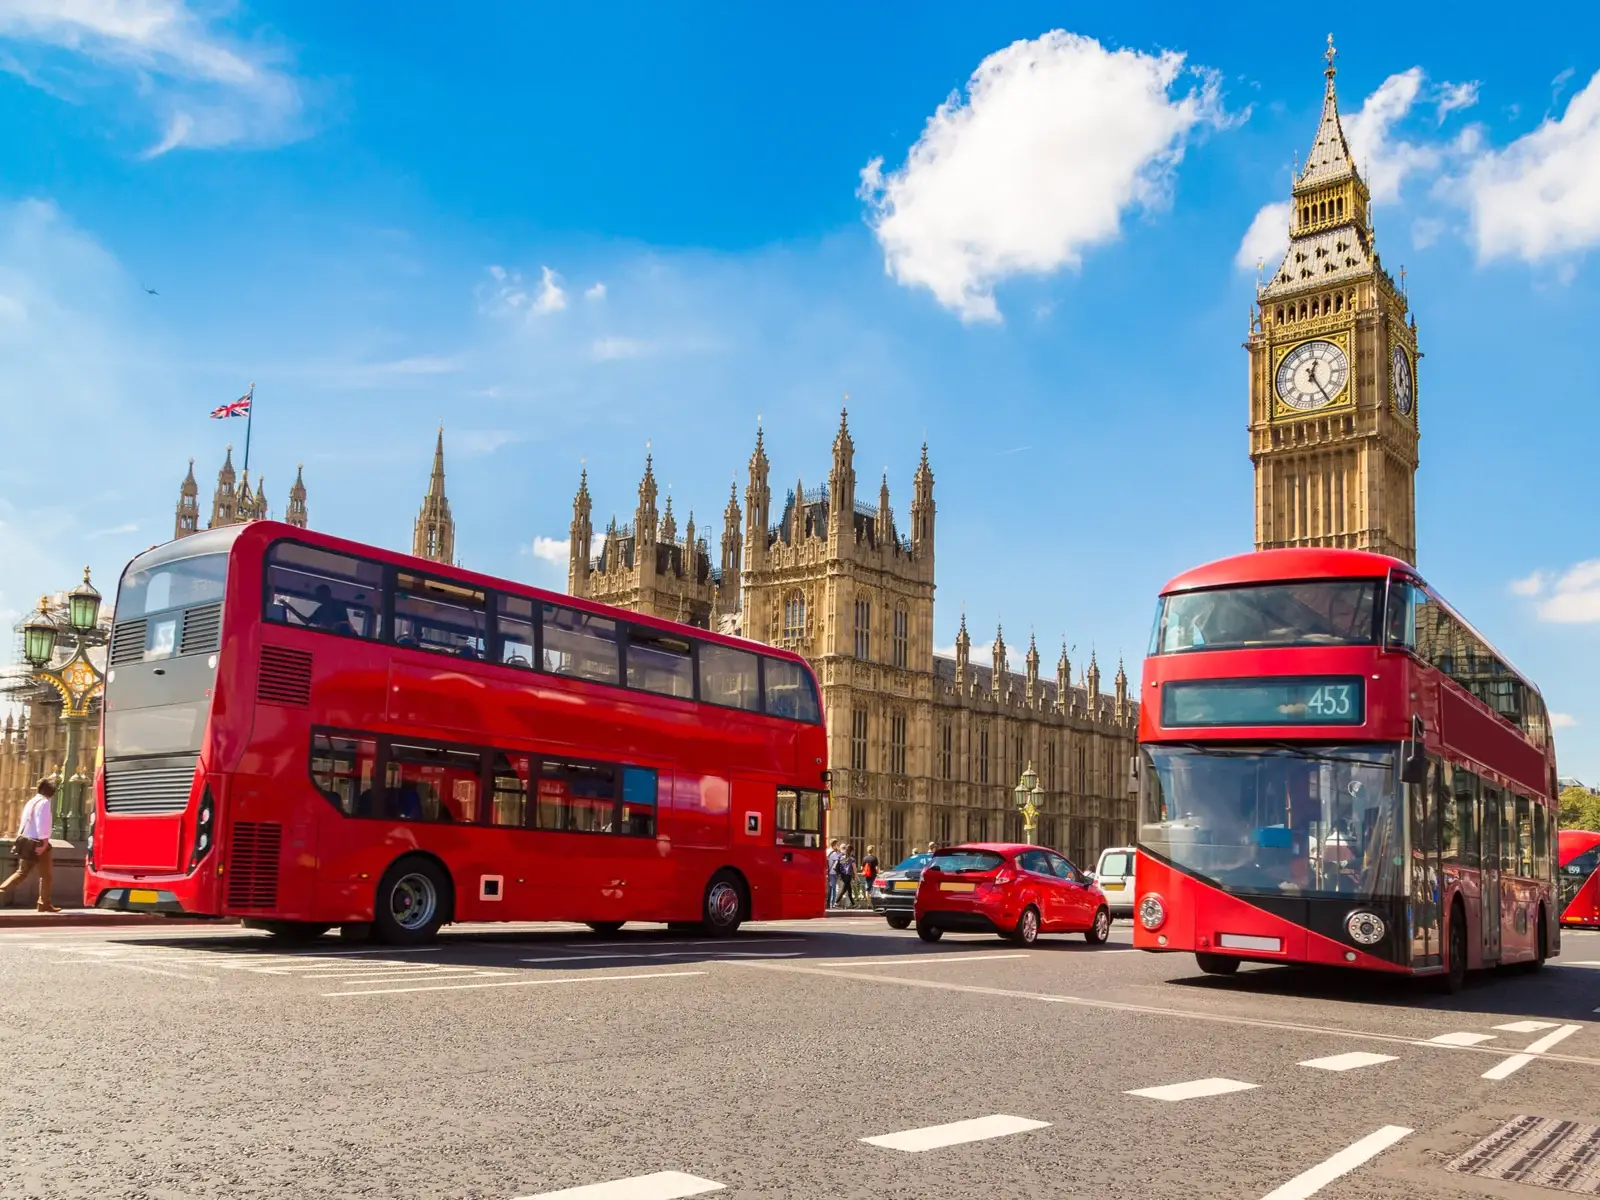 Red double-decker busses driving by Big Ben during the best time to visit London